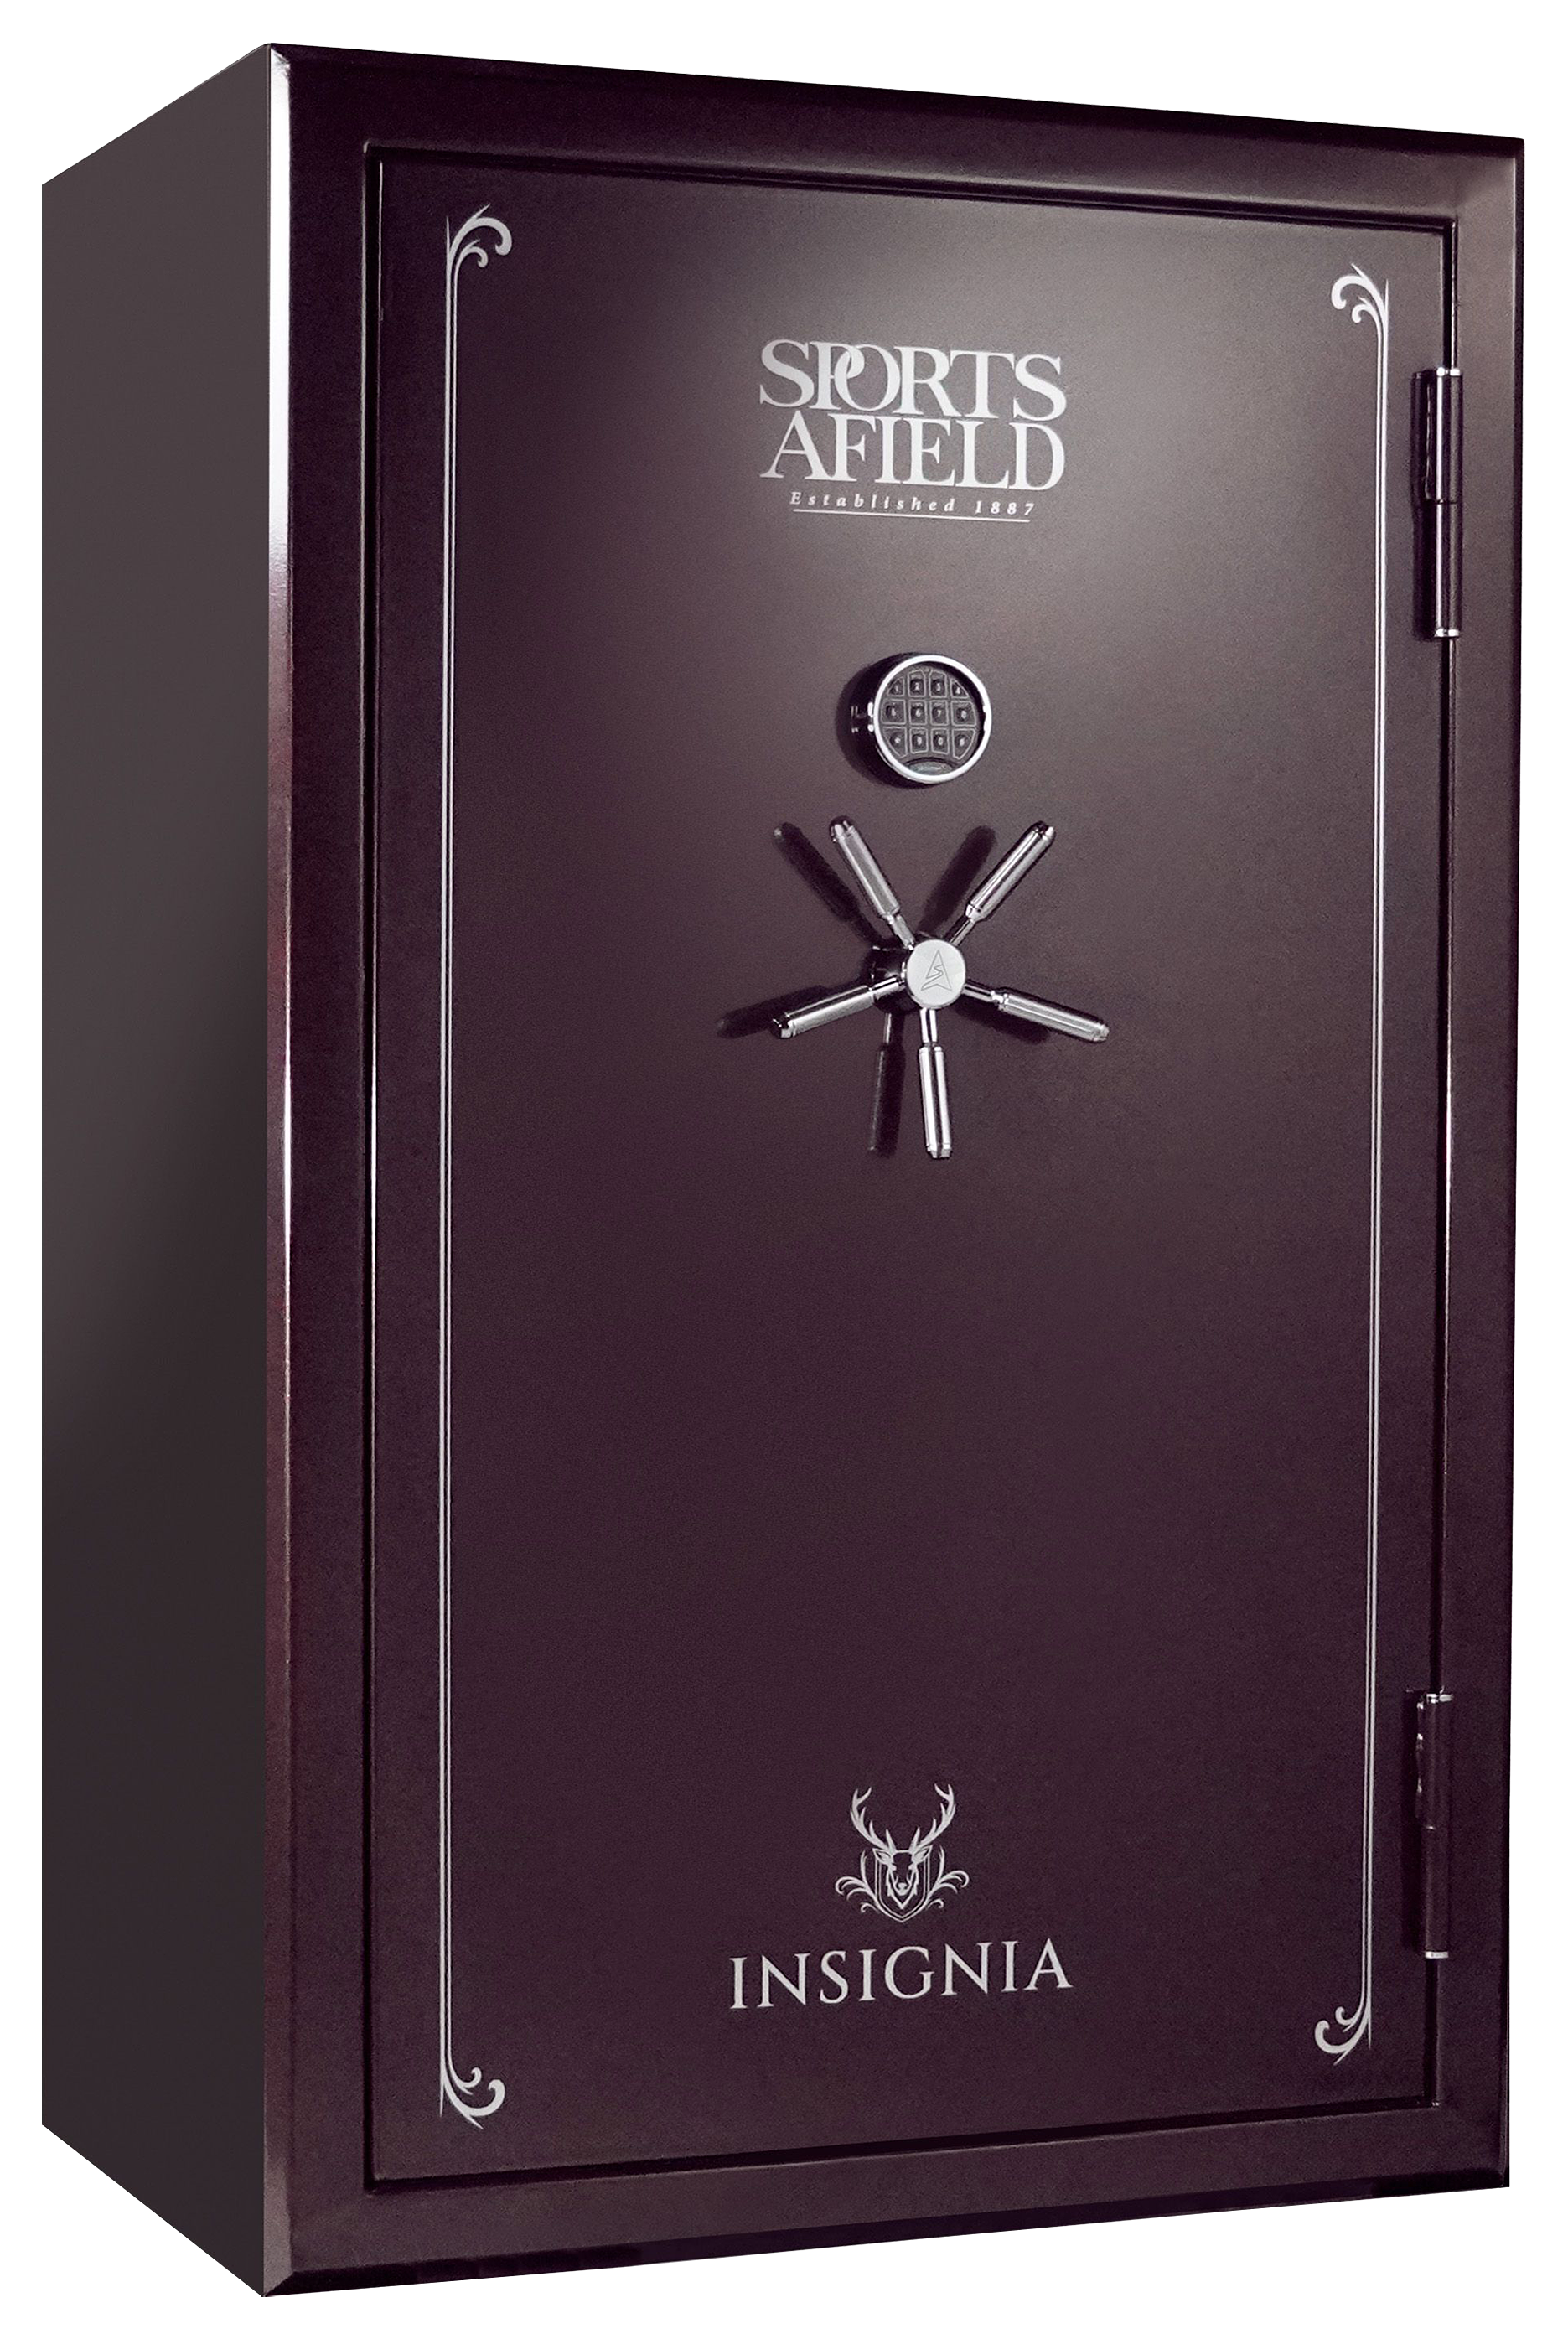 Sports Afield Insignia Series Fire-Rated 50-Gun Safe - Black Cherry